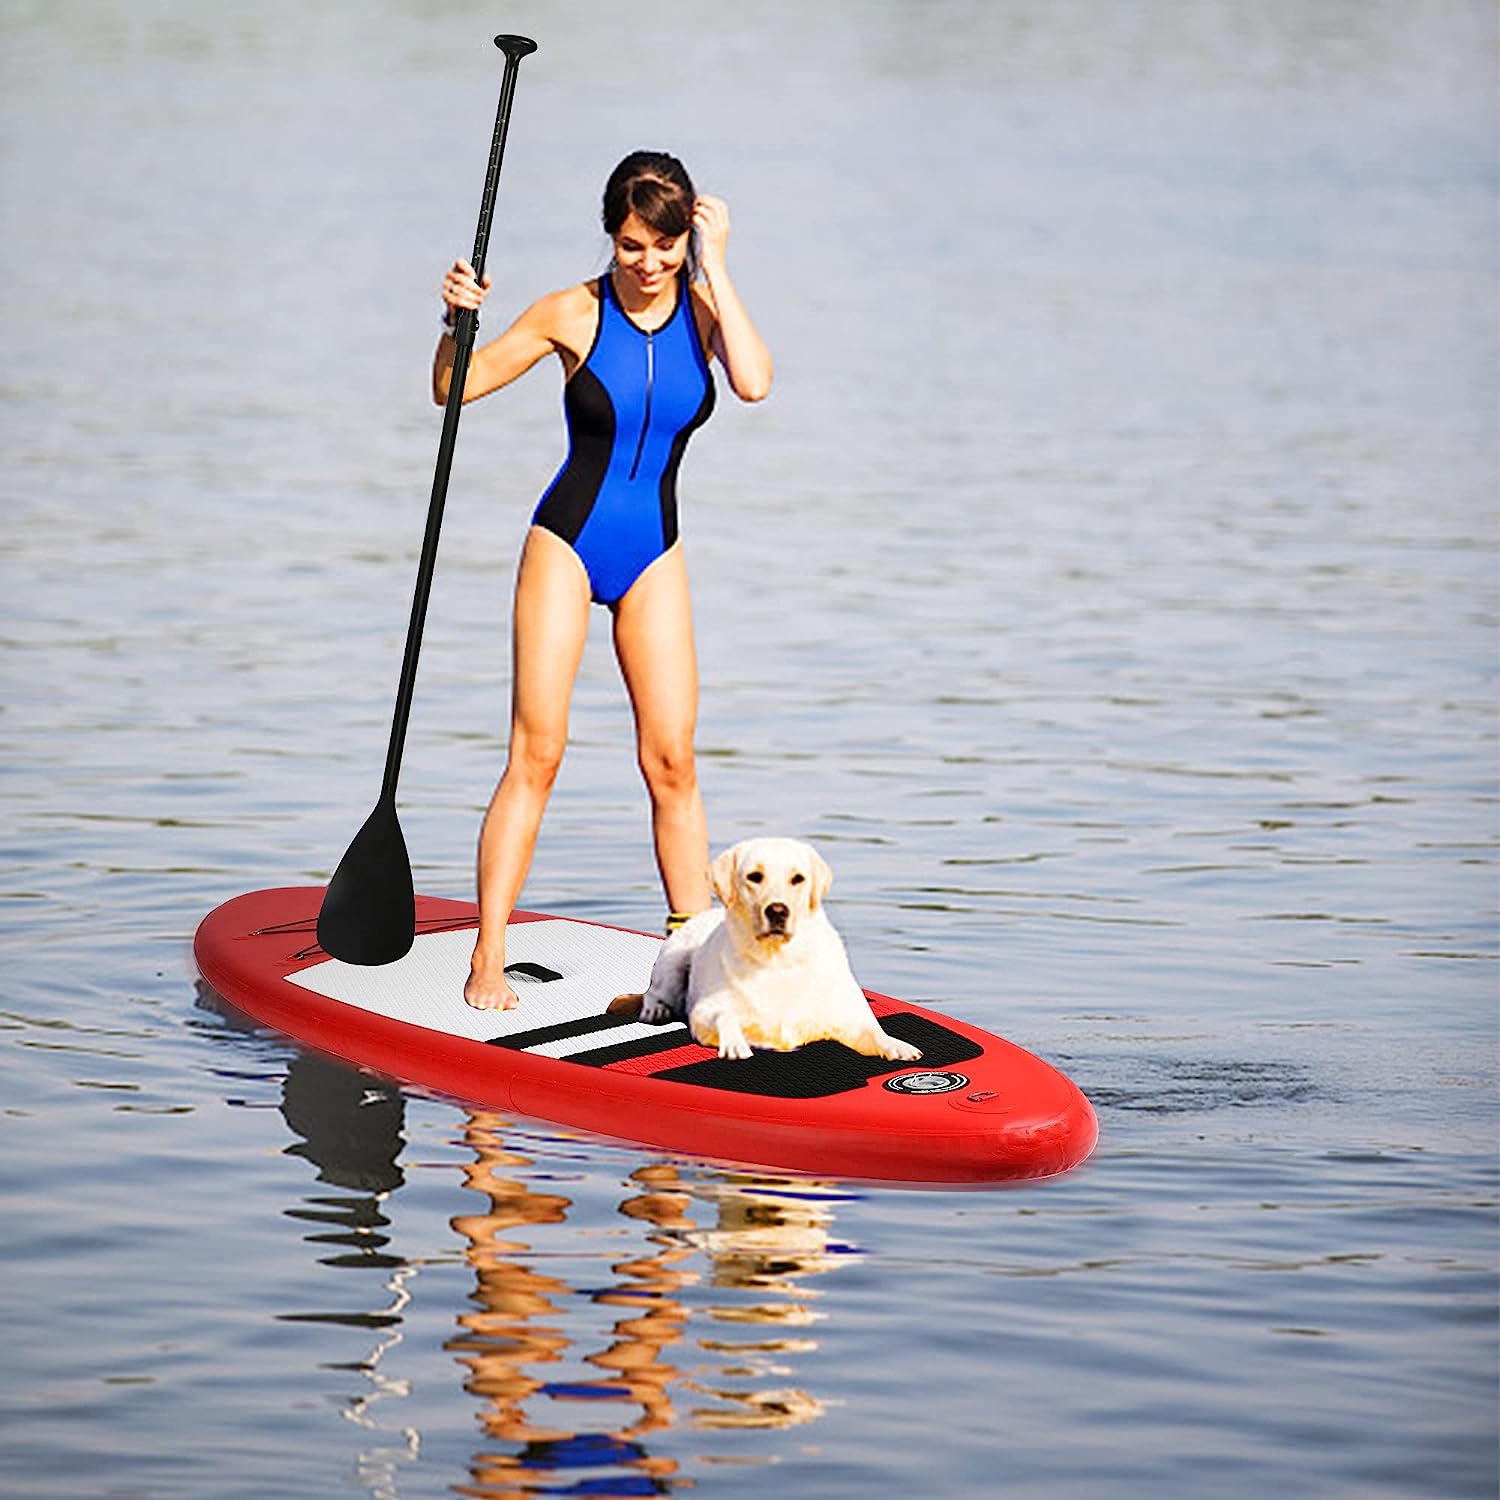 LUCKYERMORE 9'x30''x6'' Inflatable Stand Up Paddle Board with SUP Accessories & Backpack, Red